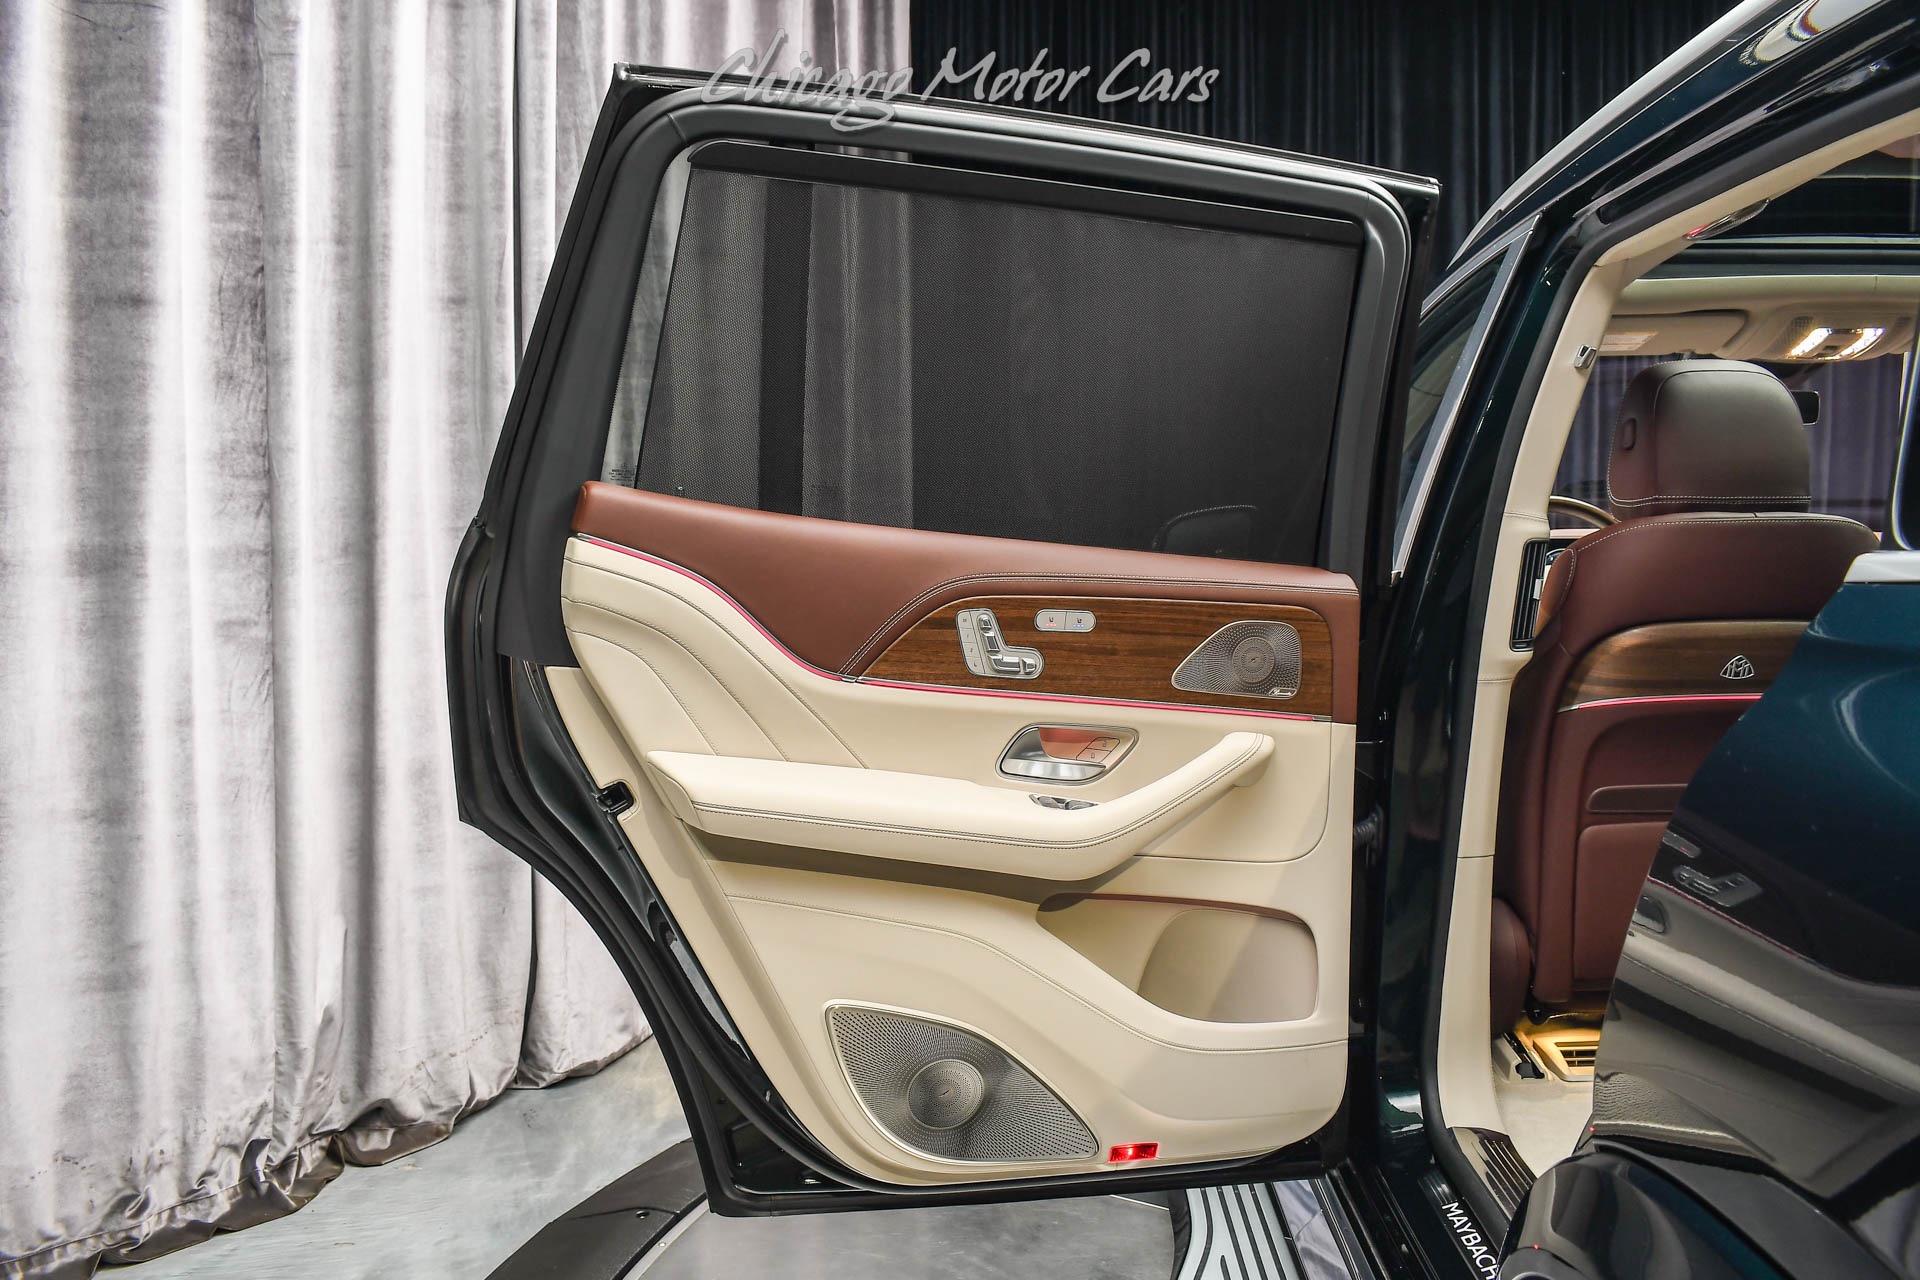 Used-2022-Mercedes-Benz-Maybach-GLS-600-4MATIC-BRAND-NEW-REFRIGERATED-COMPARTMENT-REAR-FOLDING-TABLES